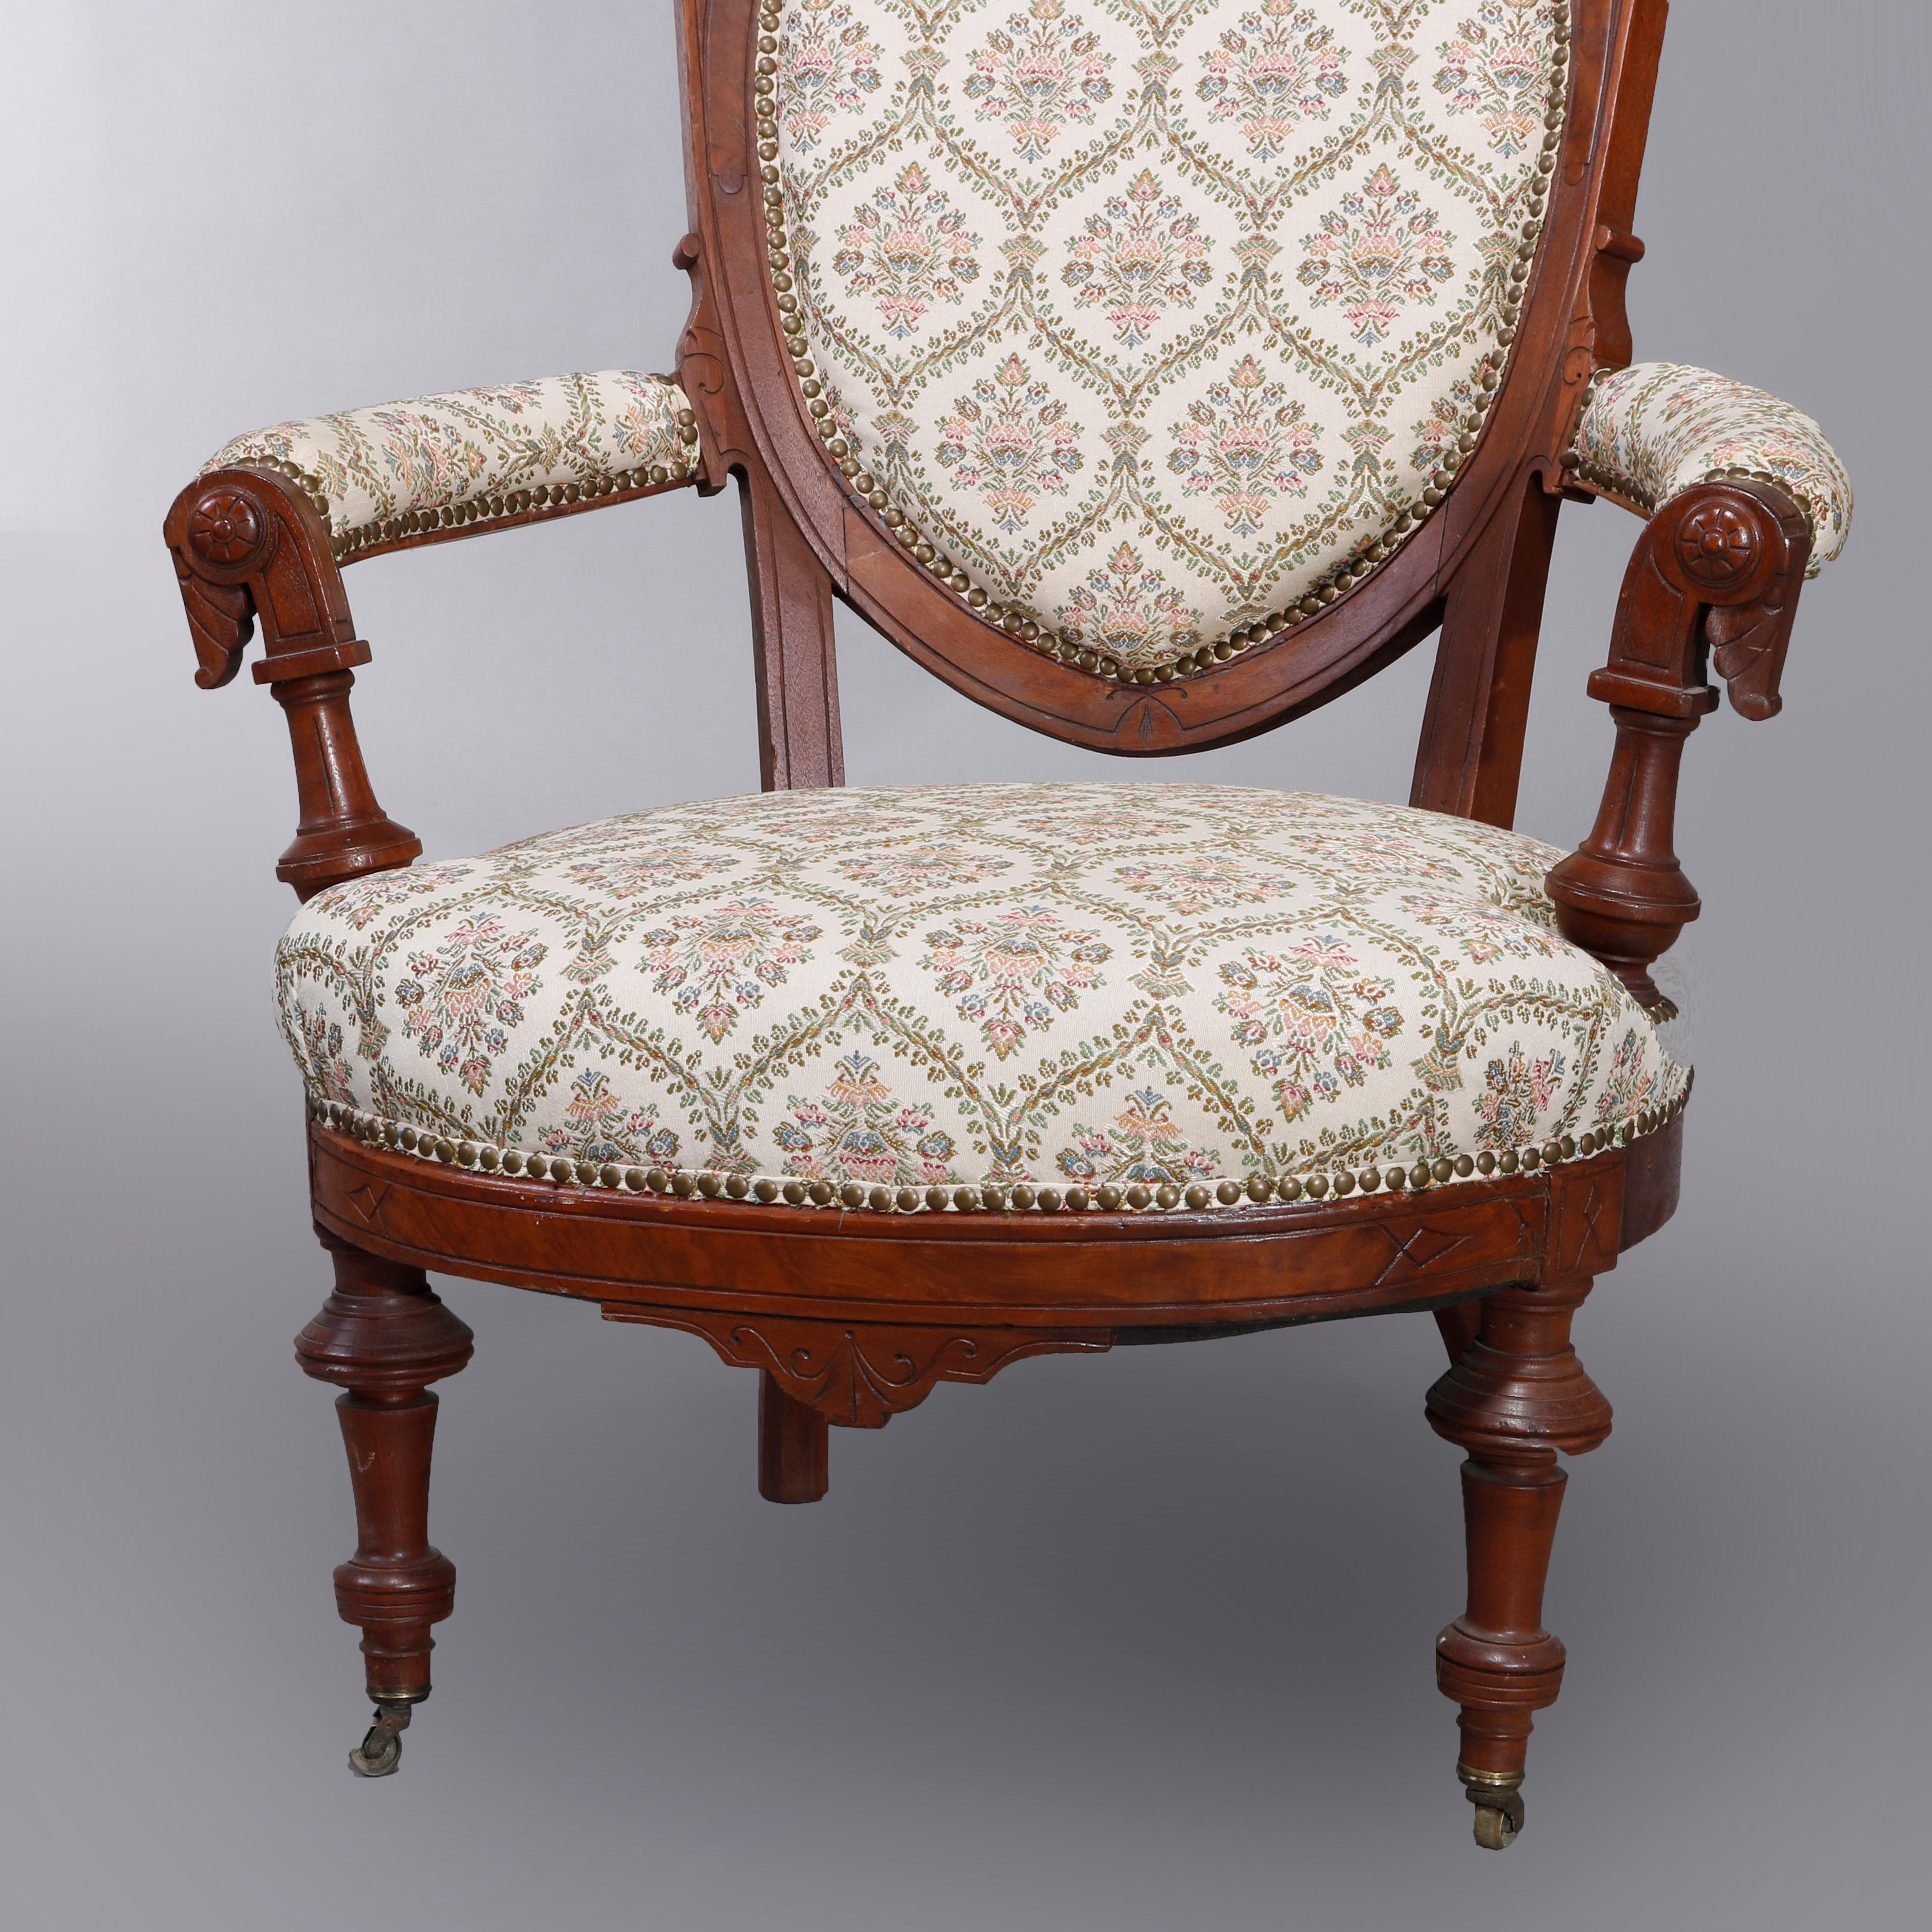 Antique Renaissance Revival Walnut & Burl Parlor Armchairs with Marquetry, c1880 In Good Condition For Sale In Big Flats, NY